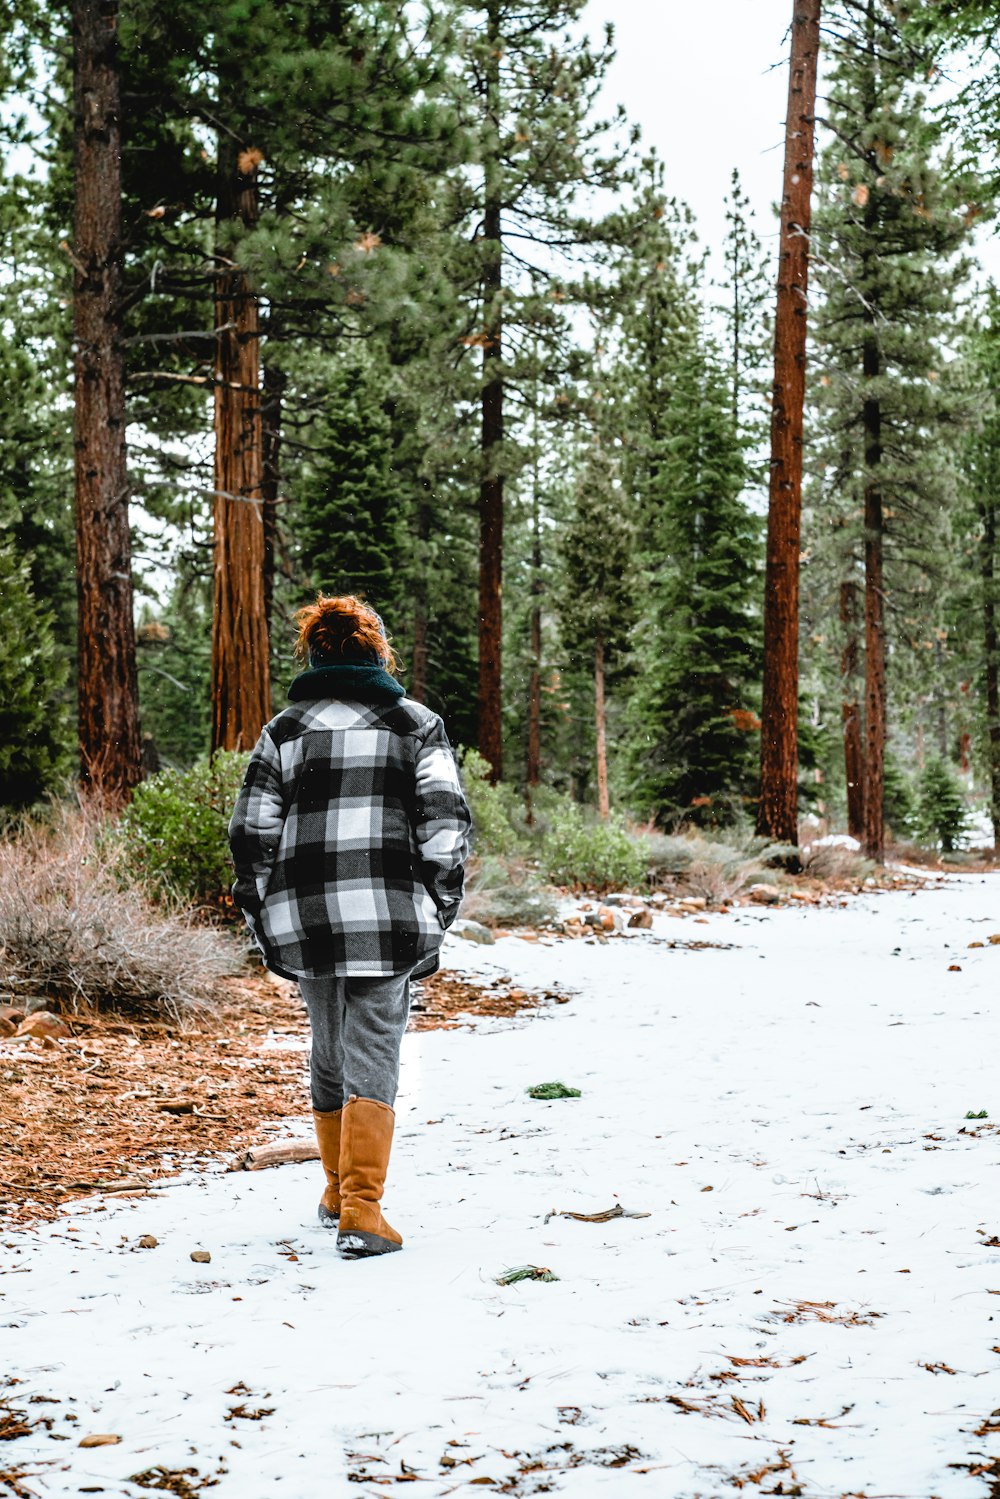 man in black and white plaid jacket walking on snow covered ground surrounded by trees during